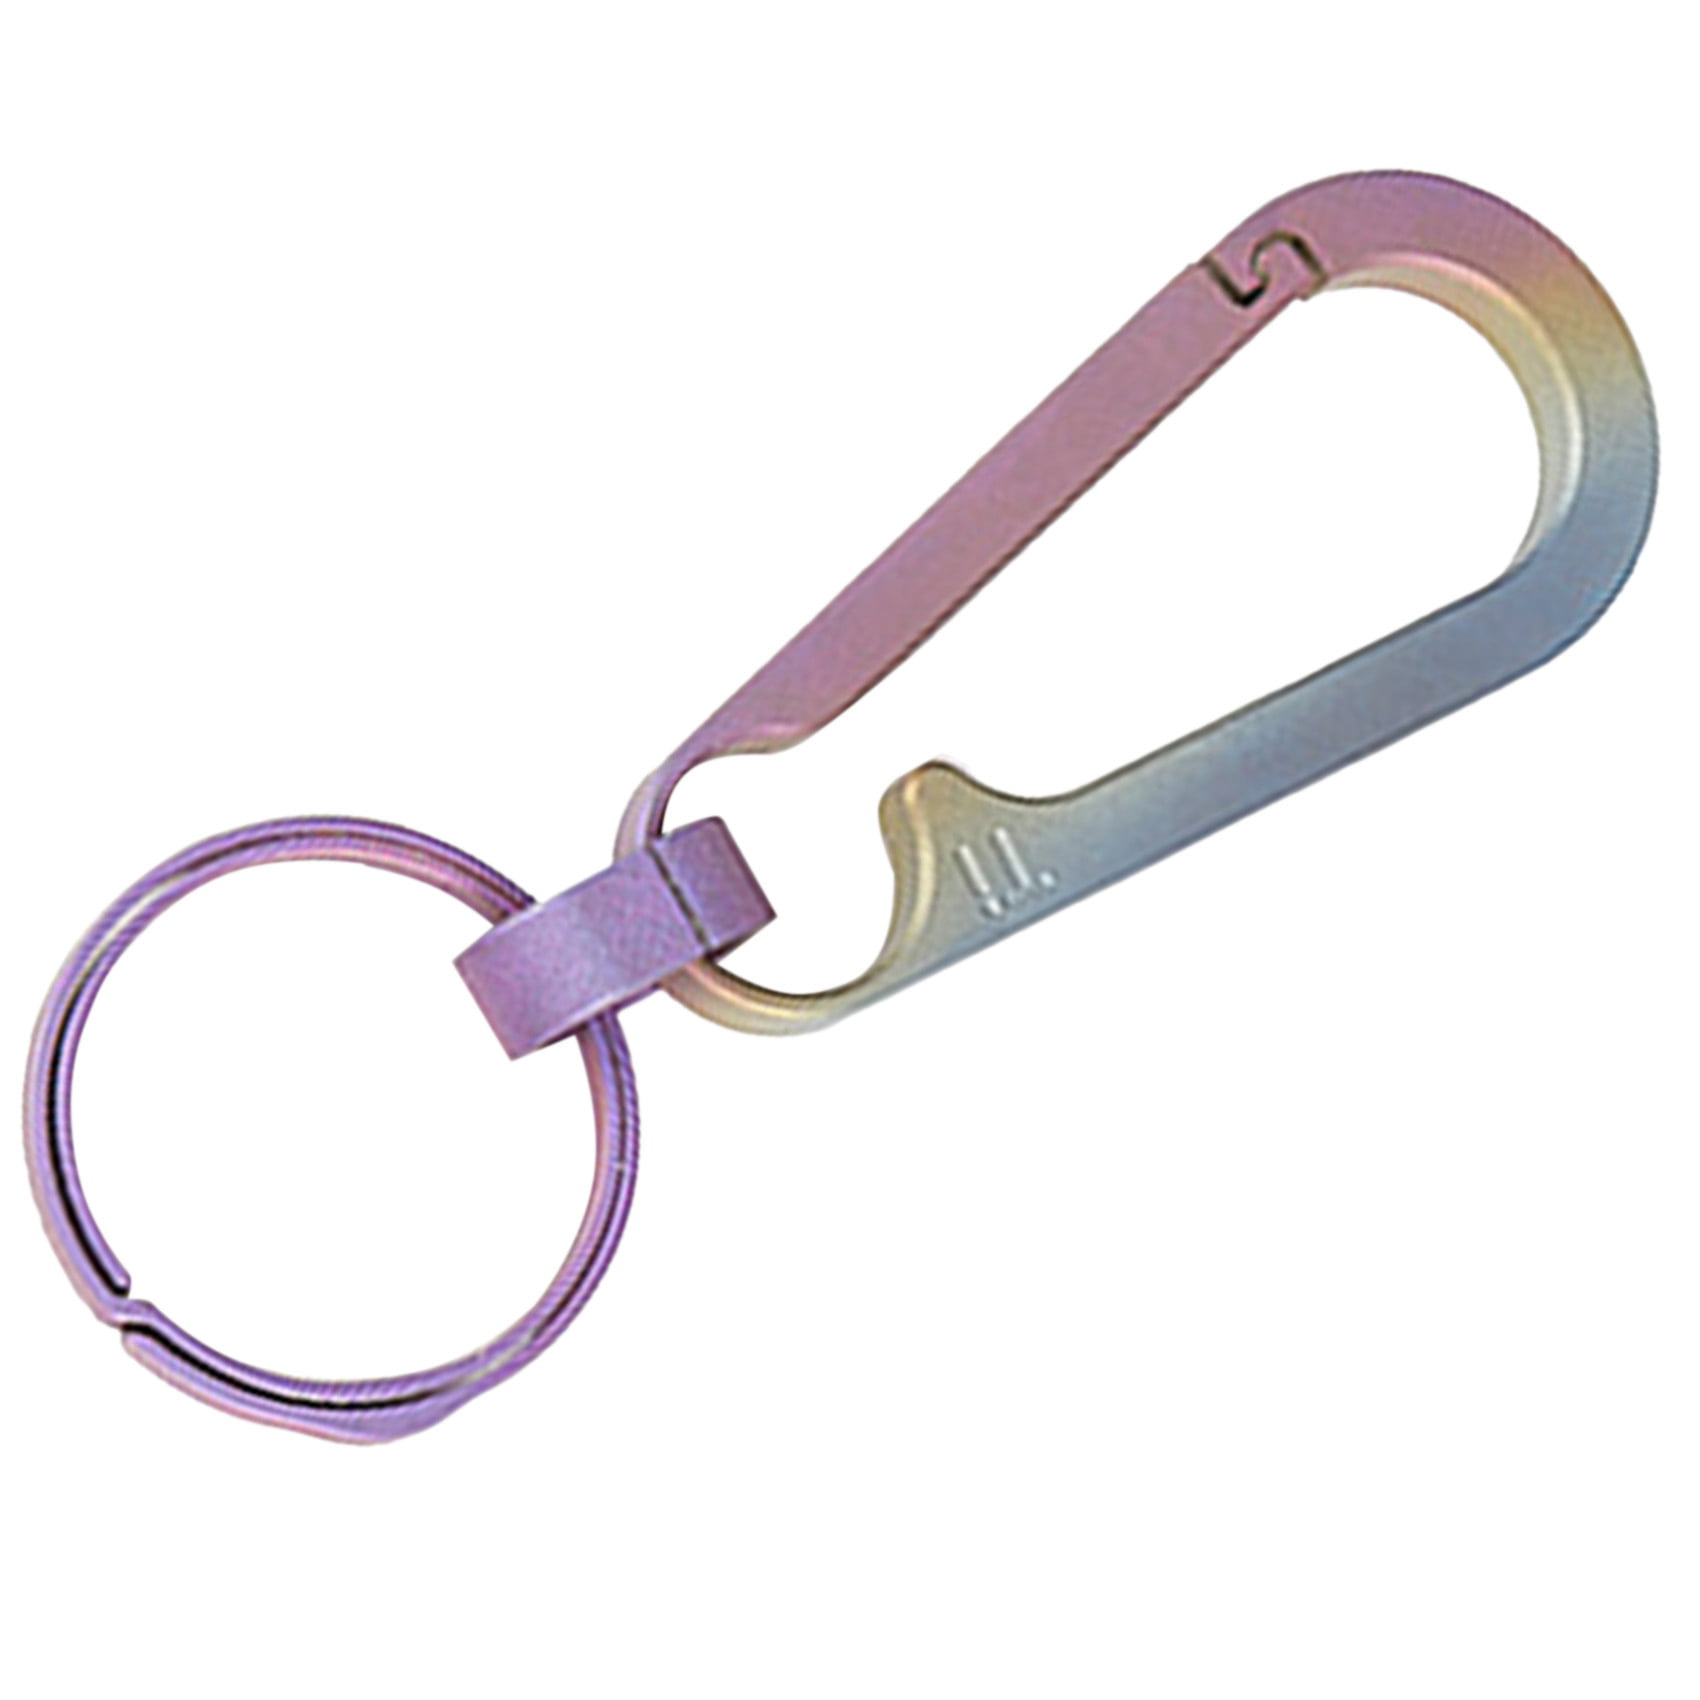 Details about   Titanium Round Carabiner Camping Spring Snap Clip Hook Keychains Key Ring Holder 